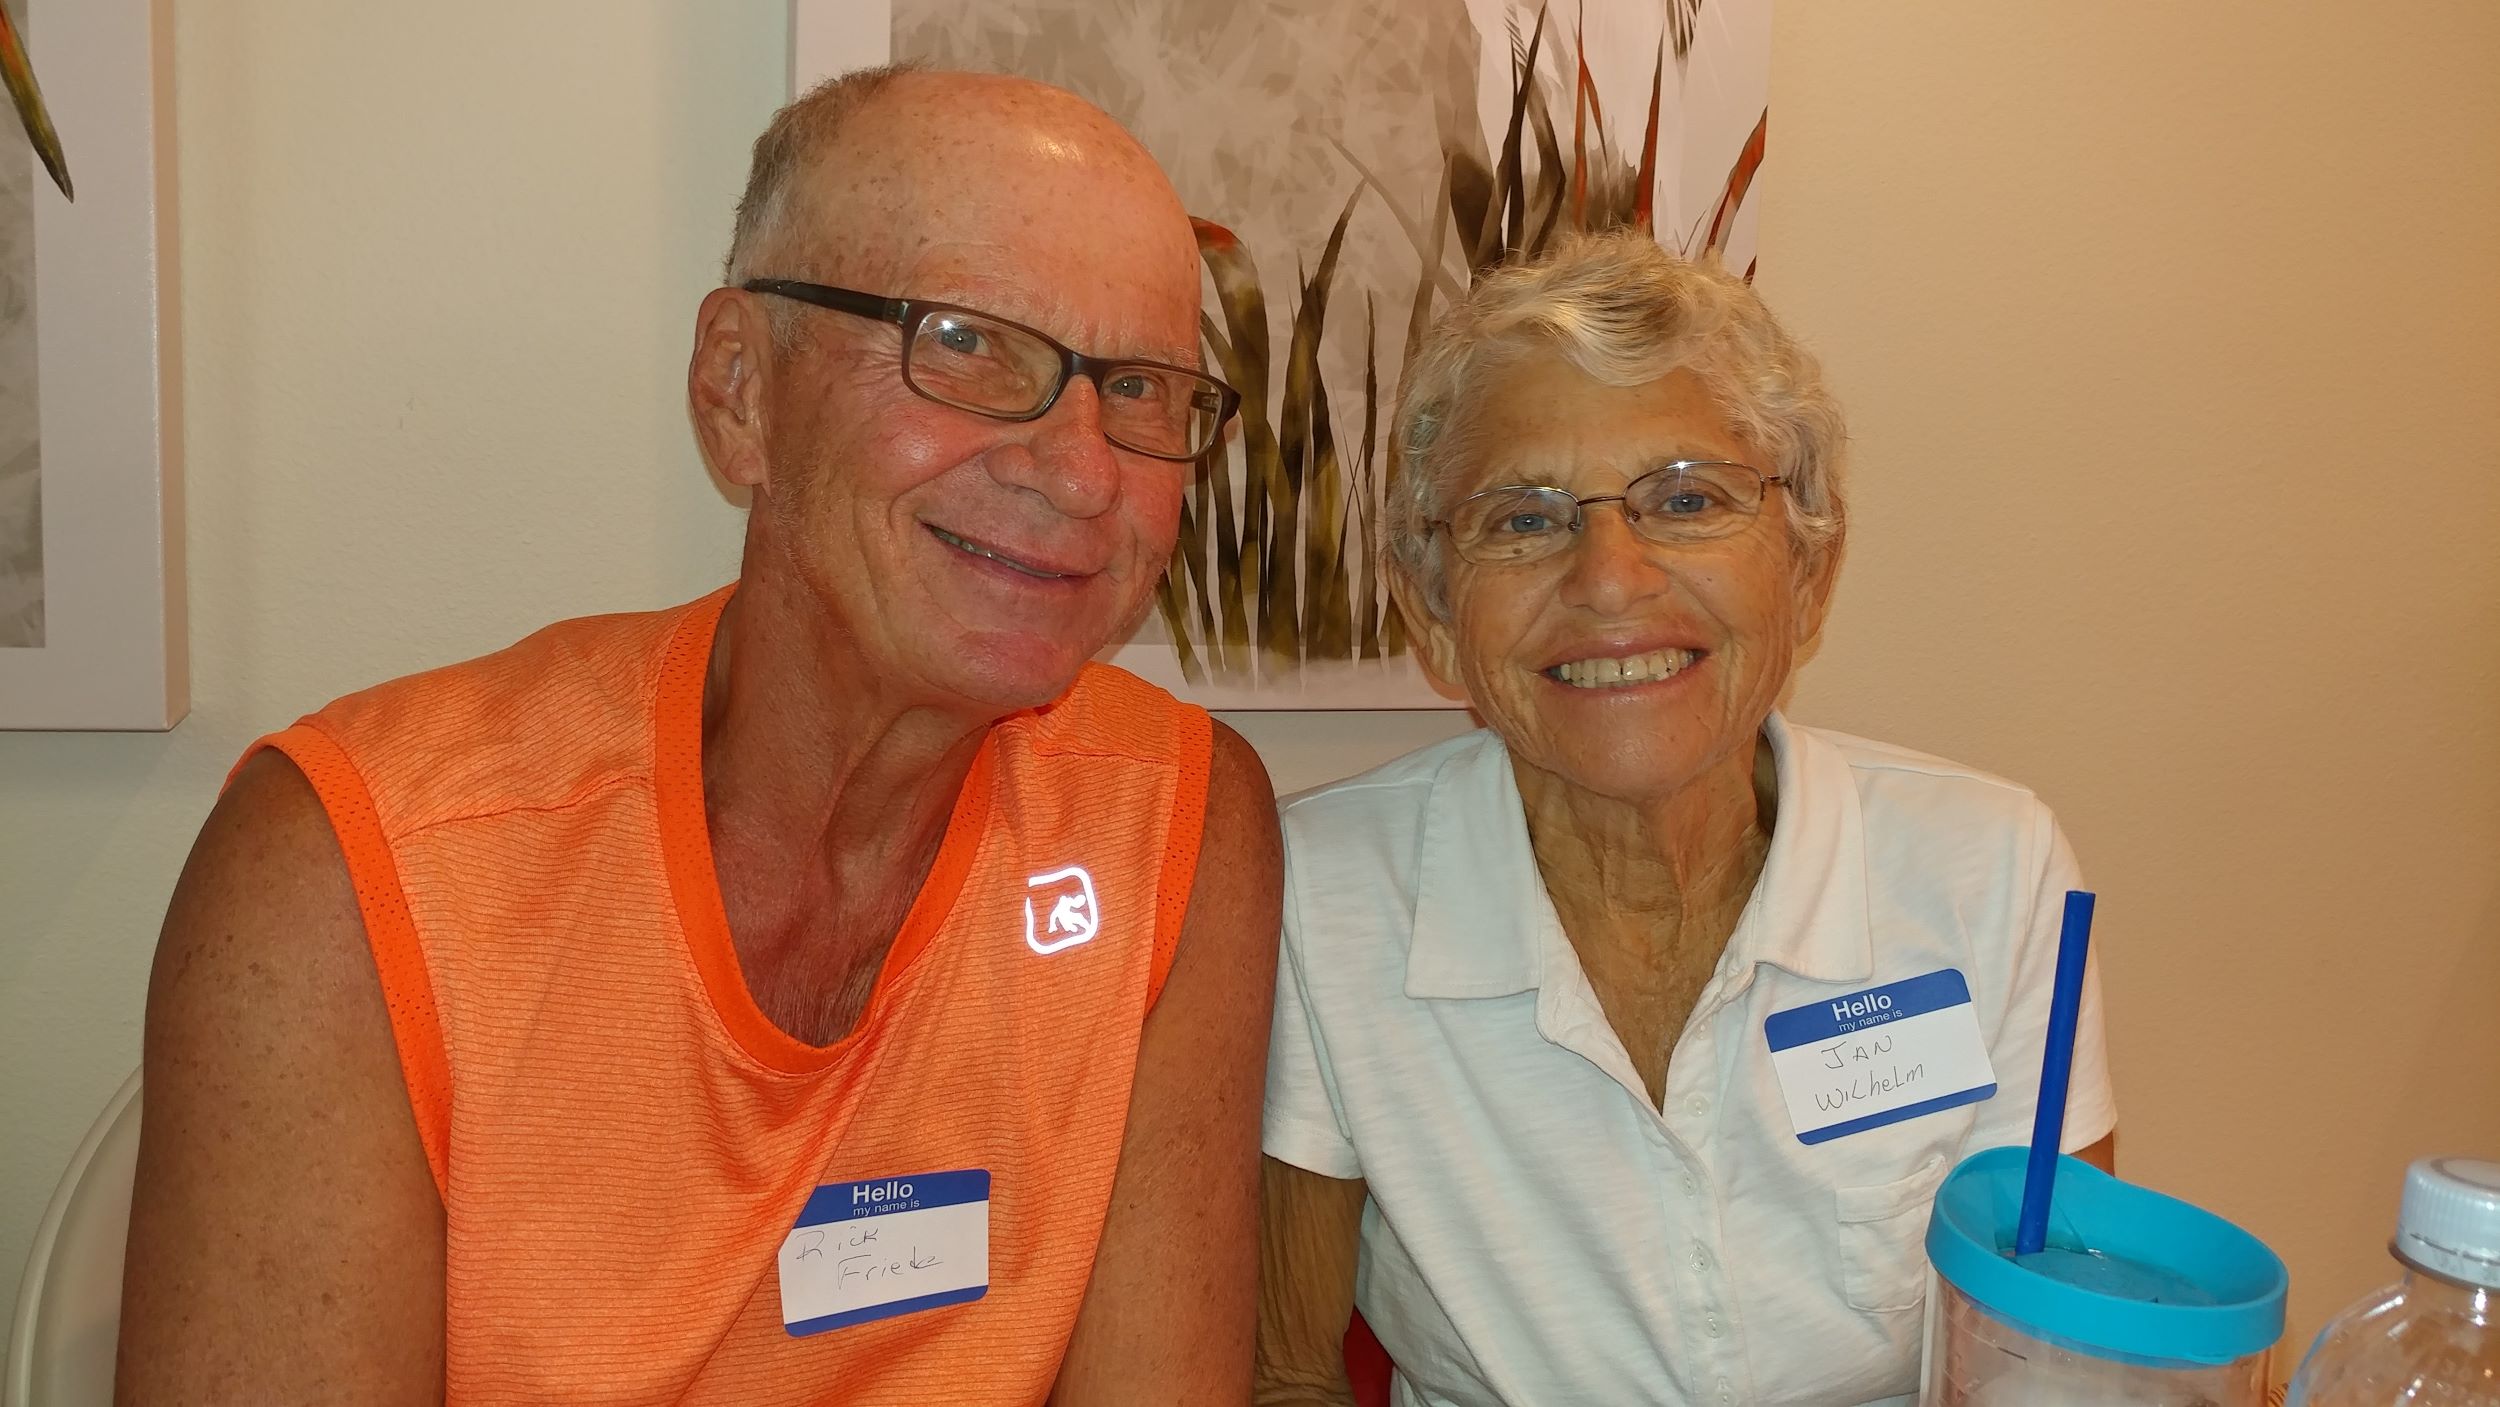 A picture of Dick and Jan of Sarasotapickleball.com